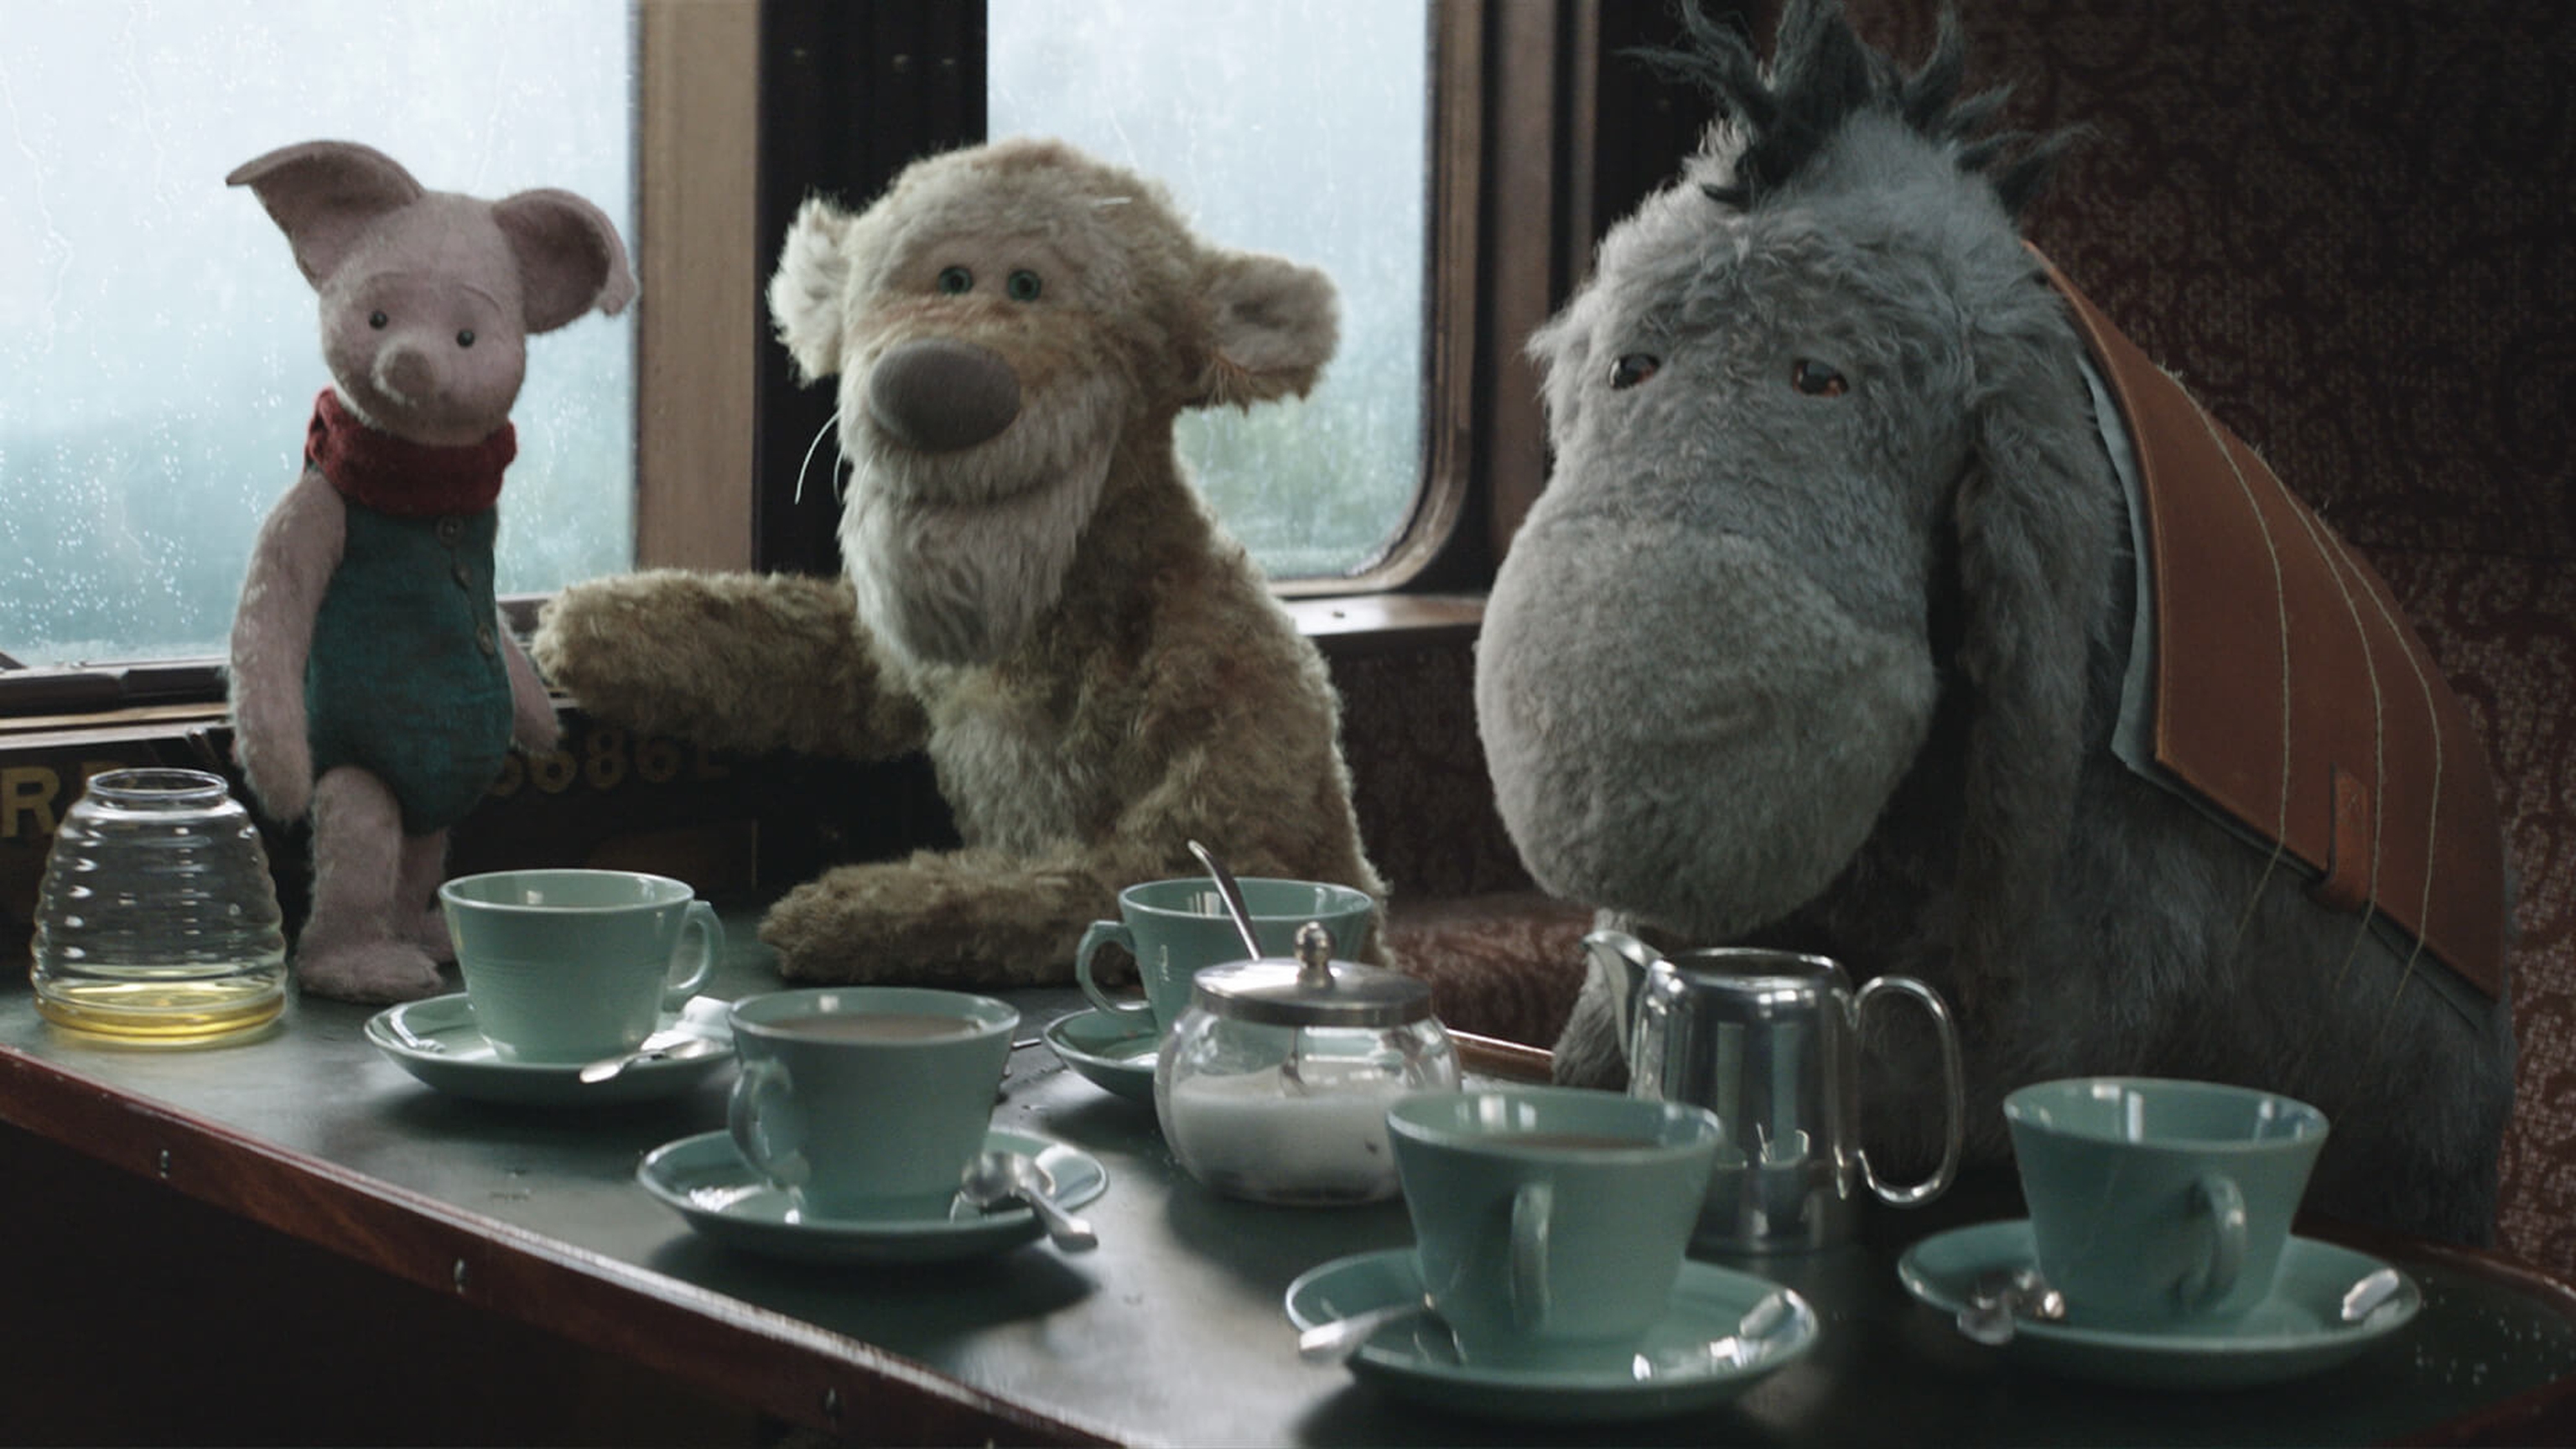 Animated characters of Piglet, Tigger and Eeyore having tea